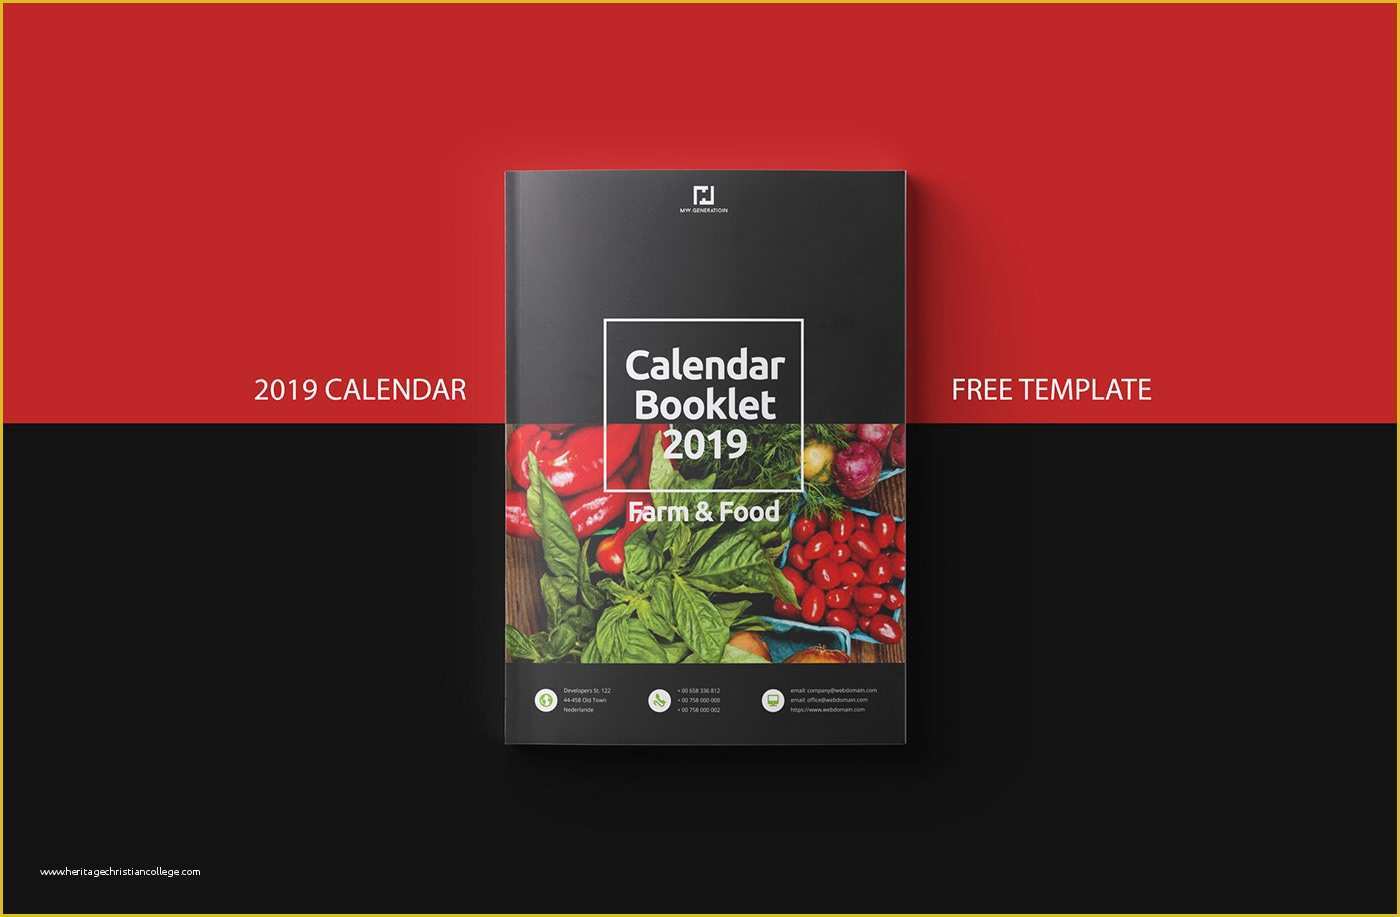 Indesign Planner Template Free Of Free Calendar 2019 Indesign Template On Behance